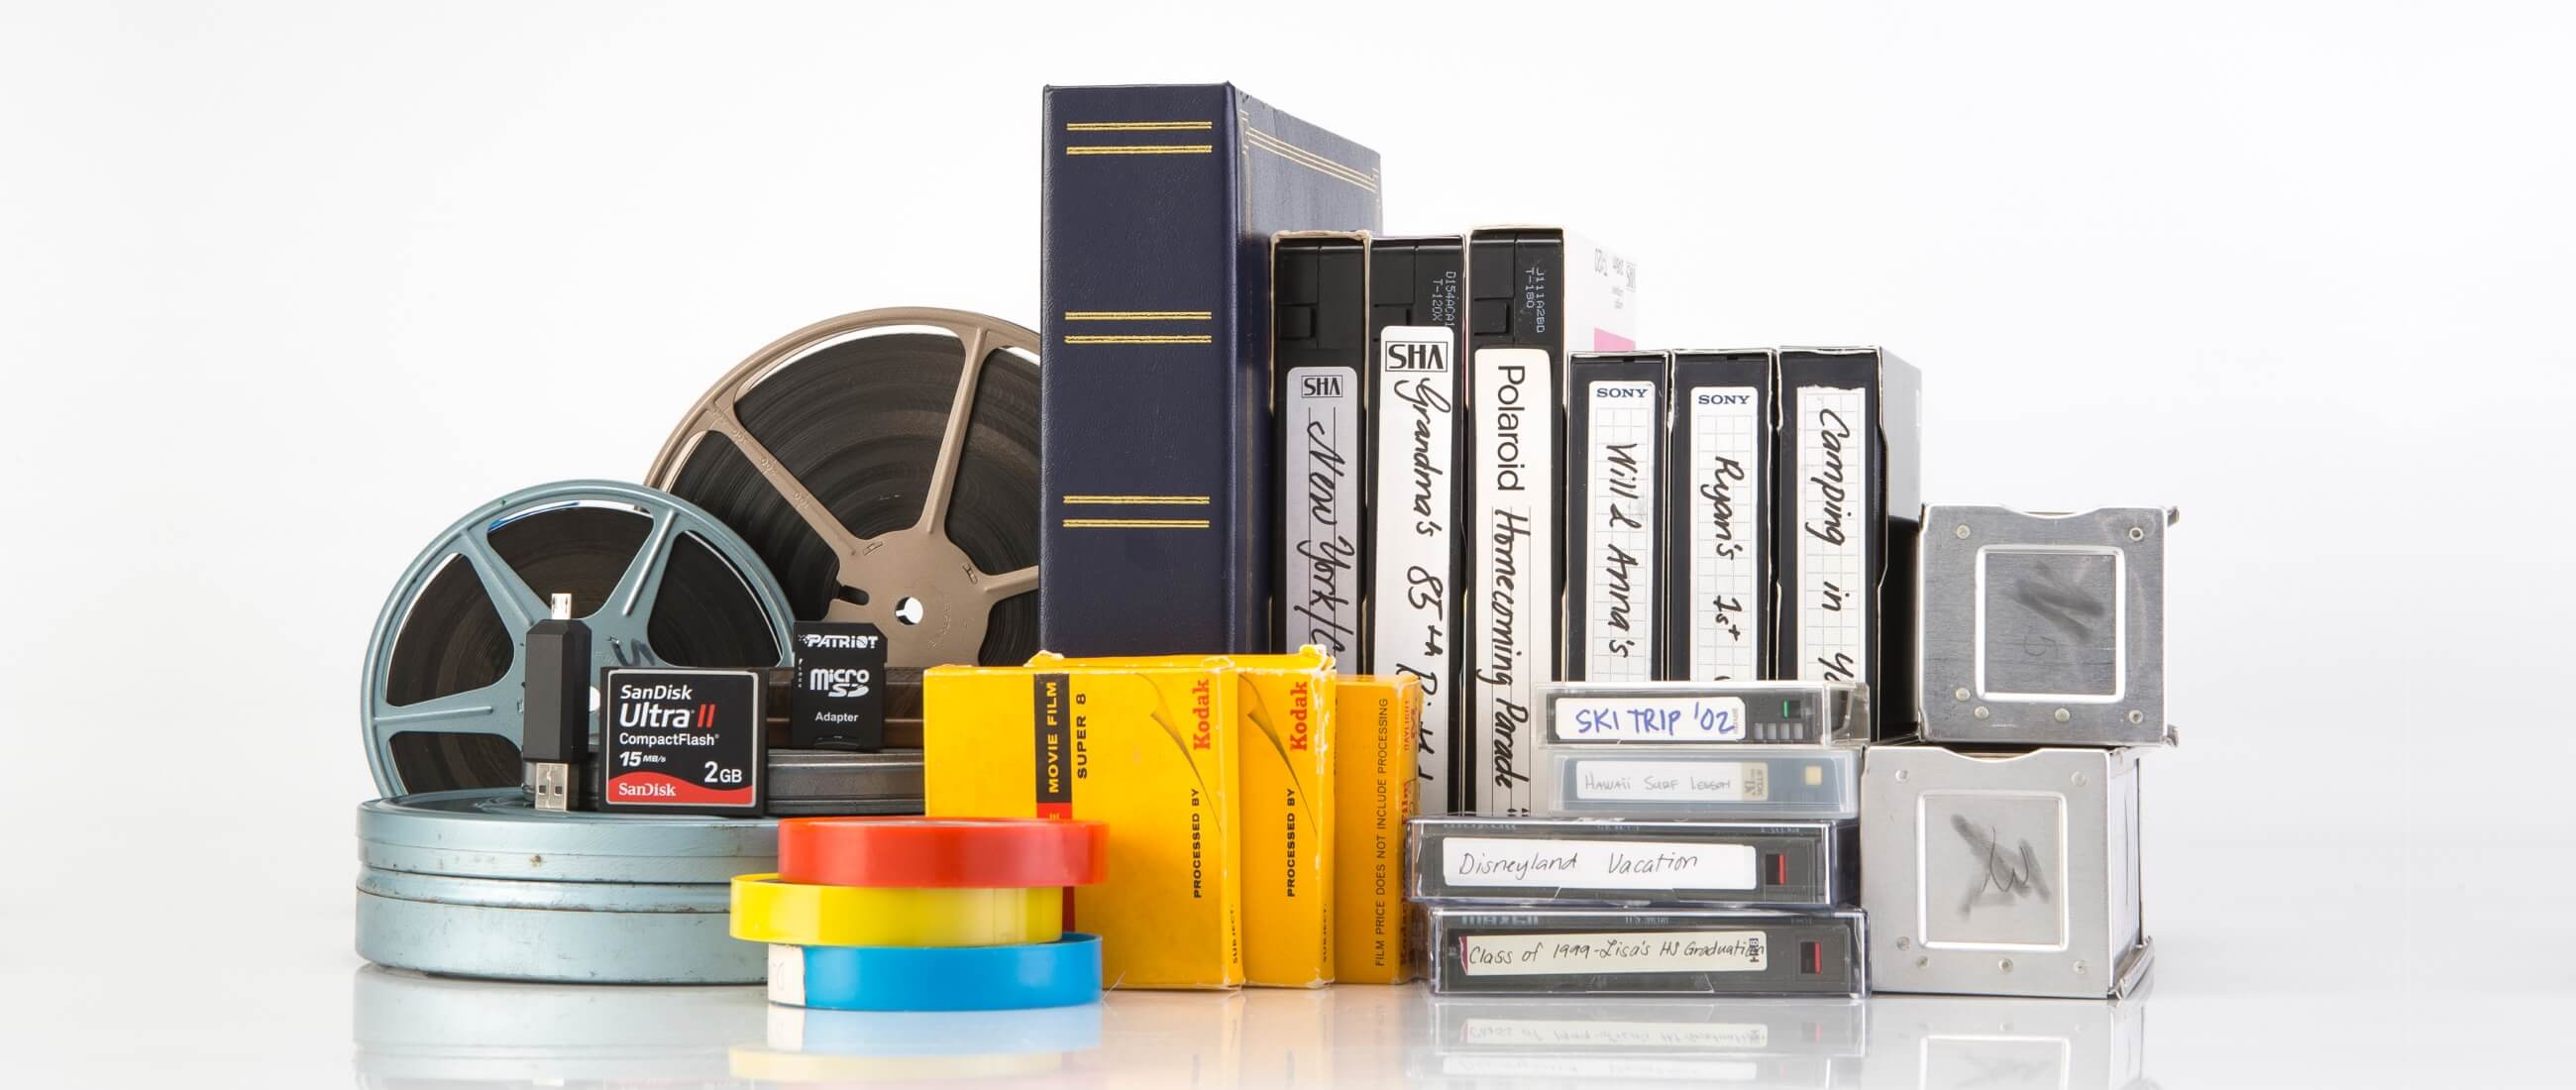 Getting Reel, Best movies of the 1980s